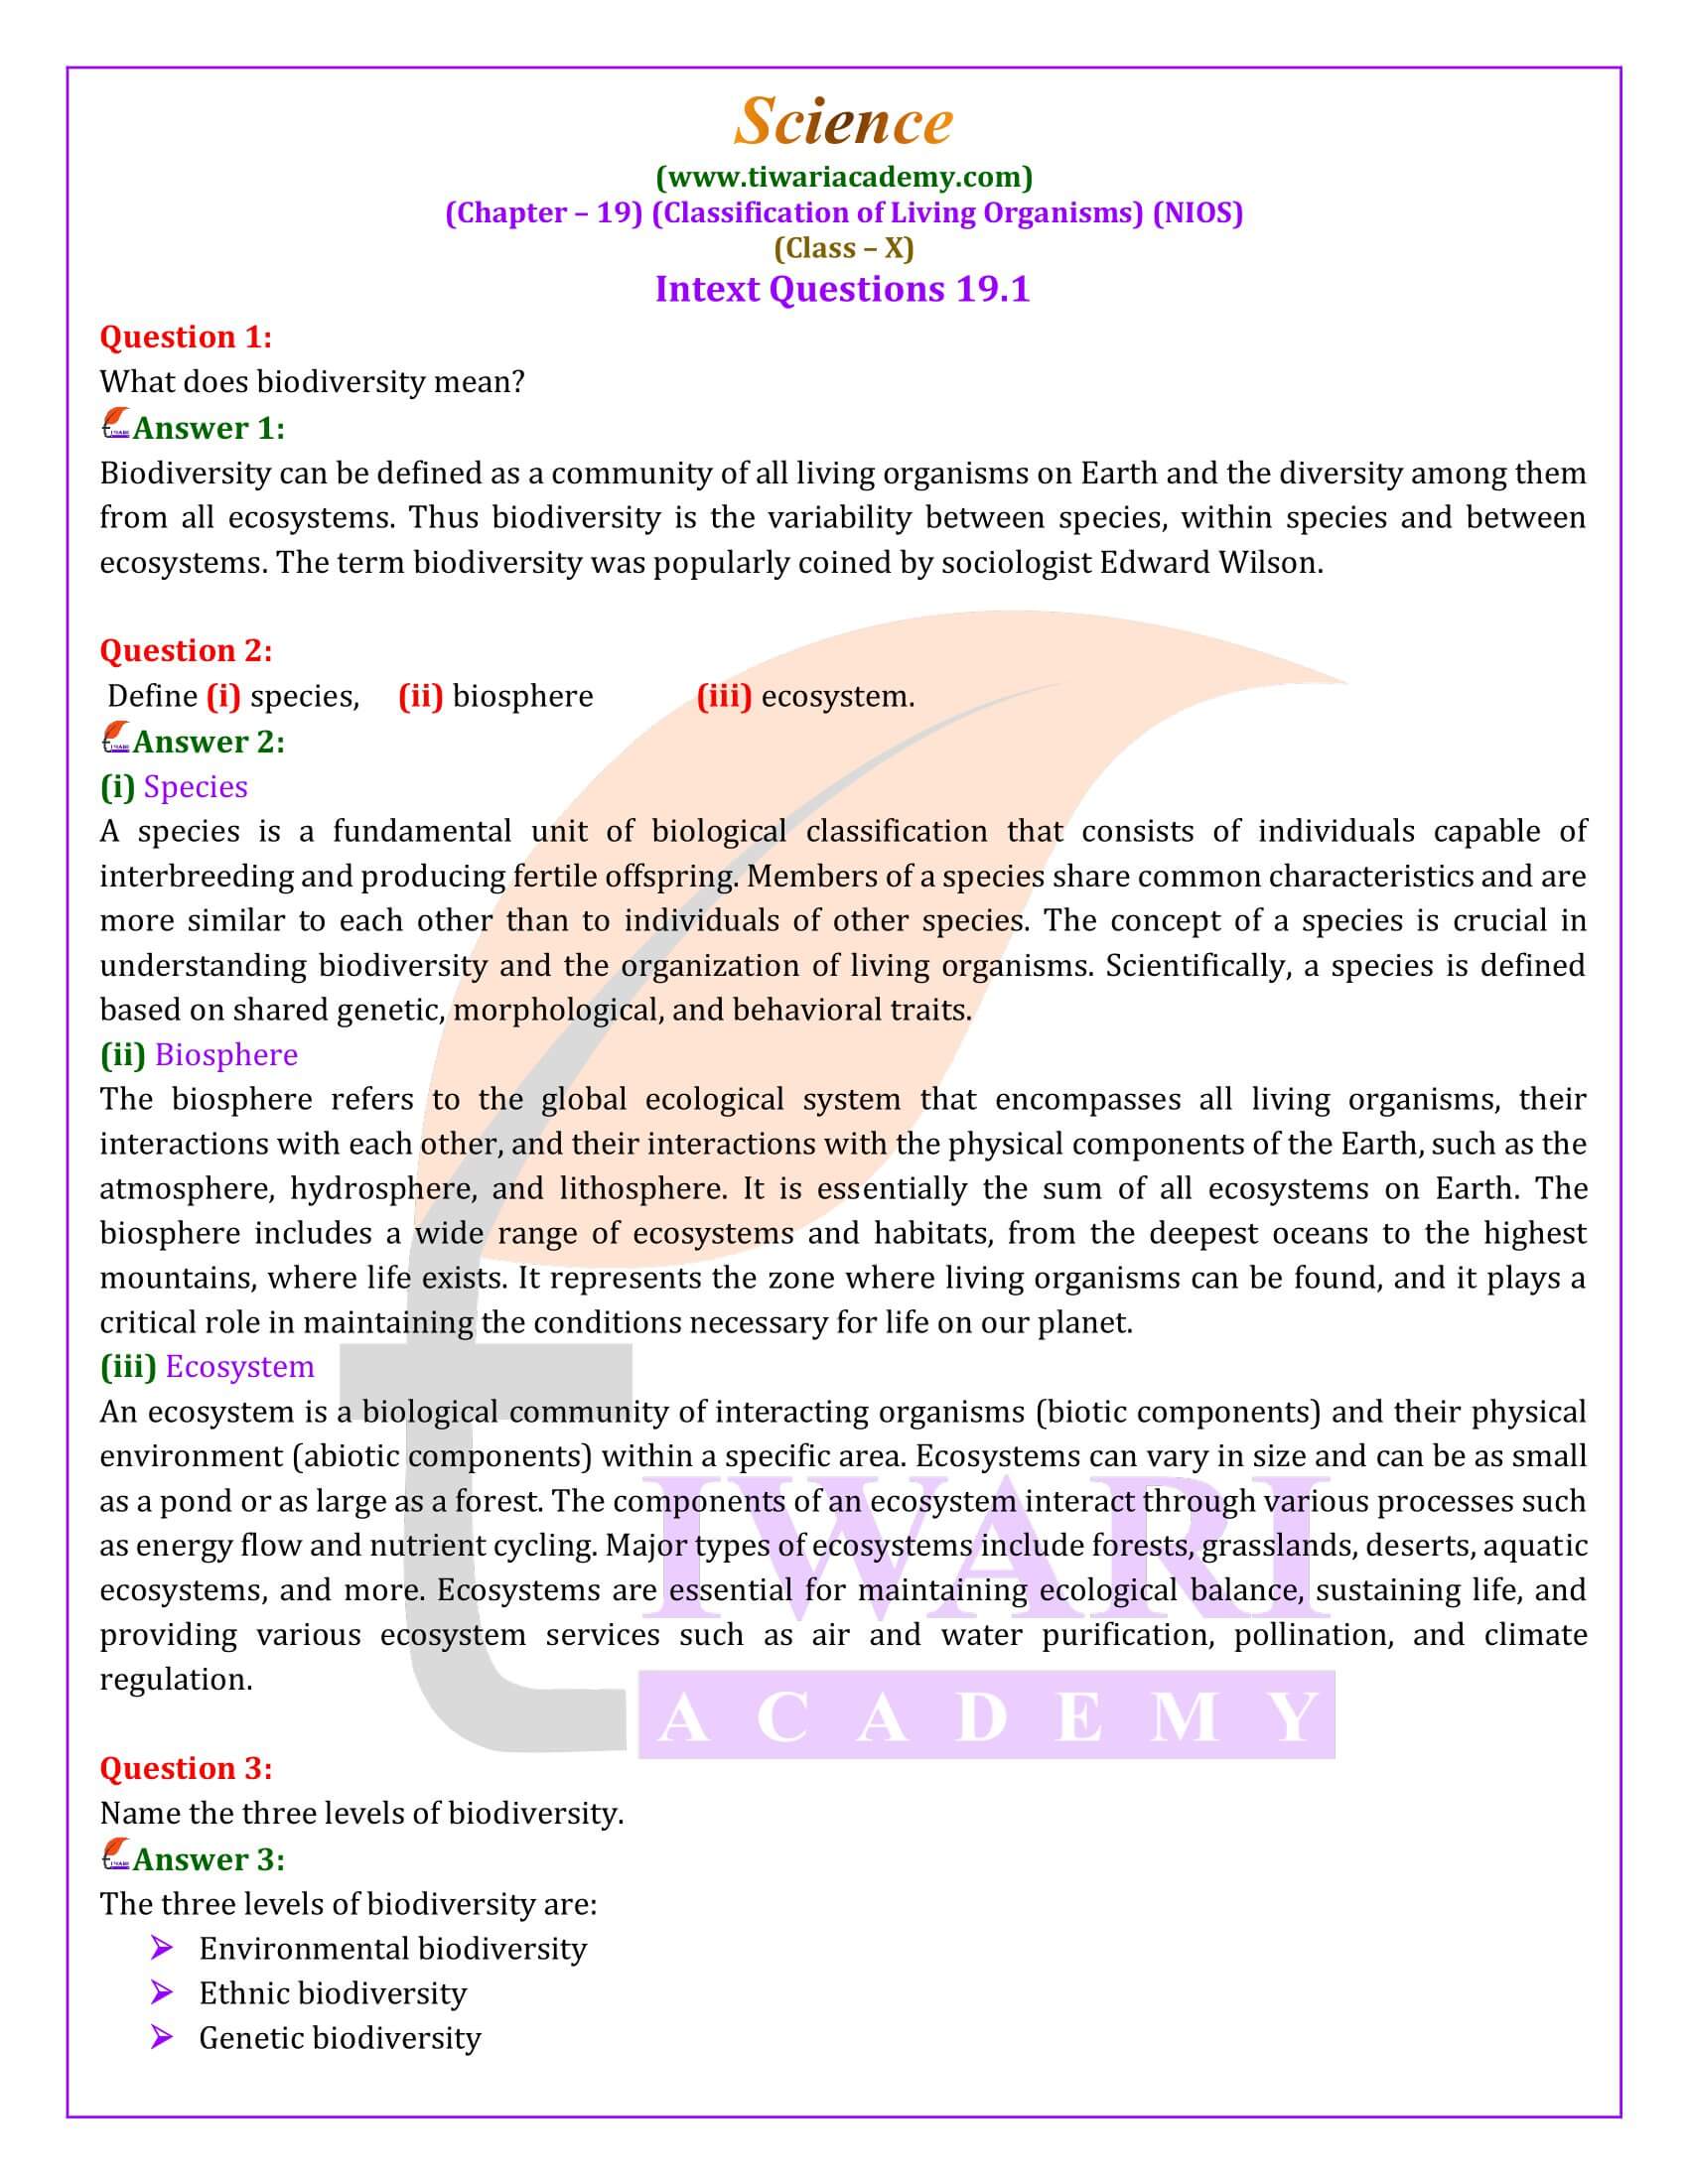 NIOS Class 10 Science Chapter 19 Classification of Living Organisms Solutions